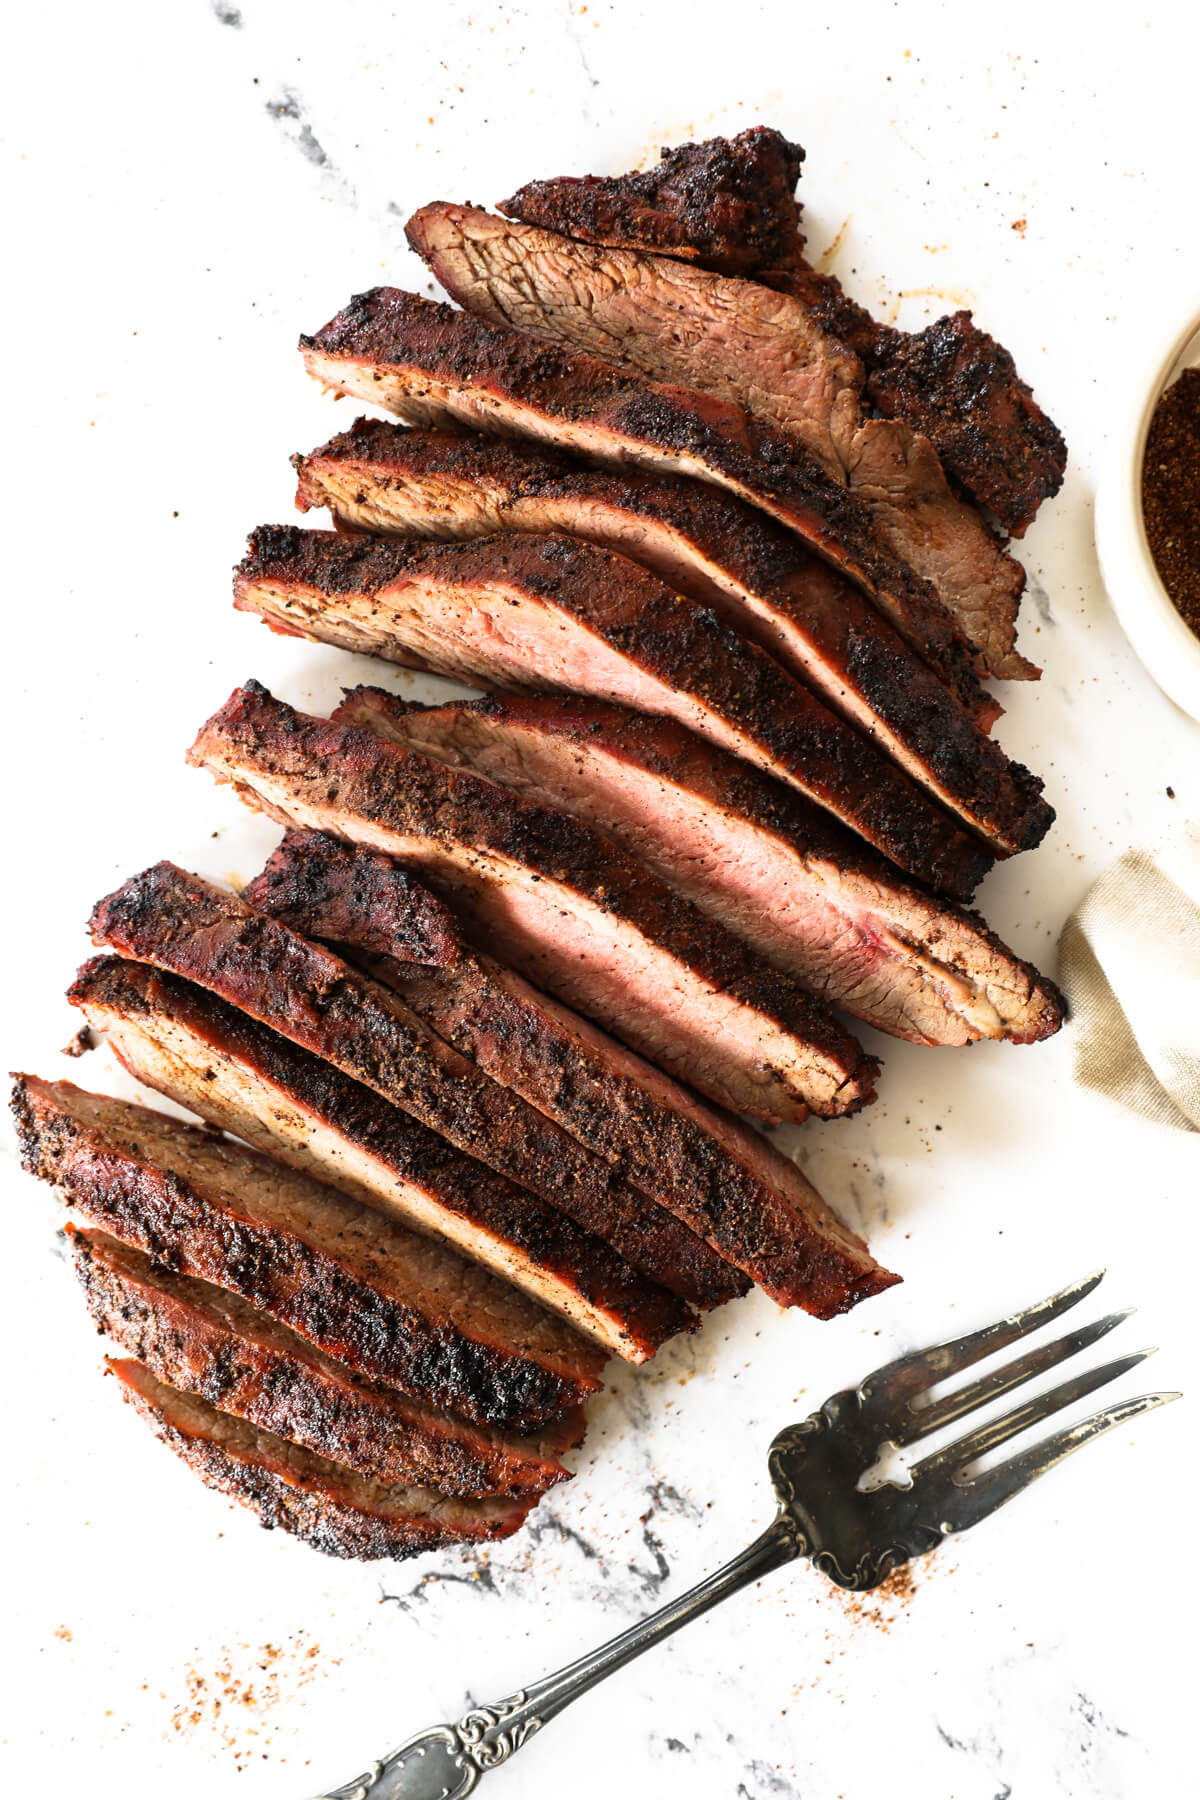 Spice-rubbed Grilled Flank Steak Recipe